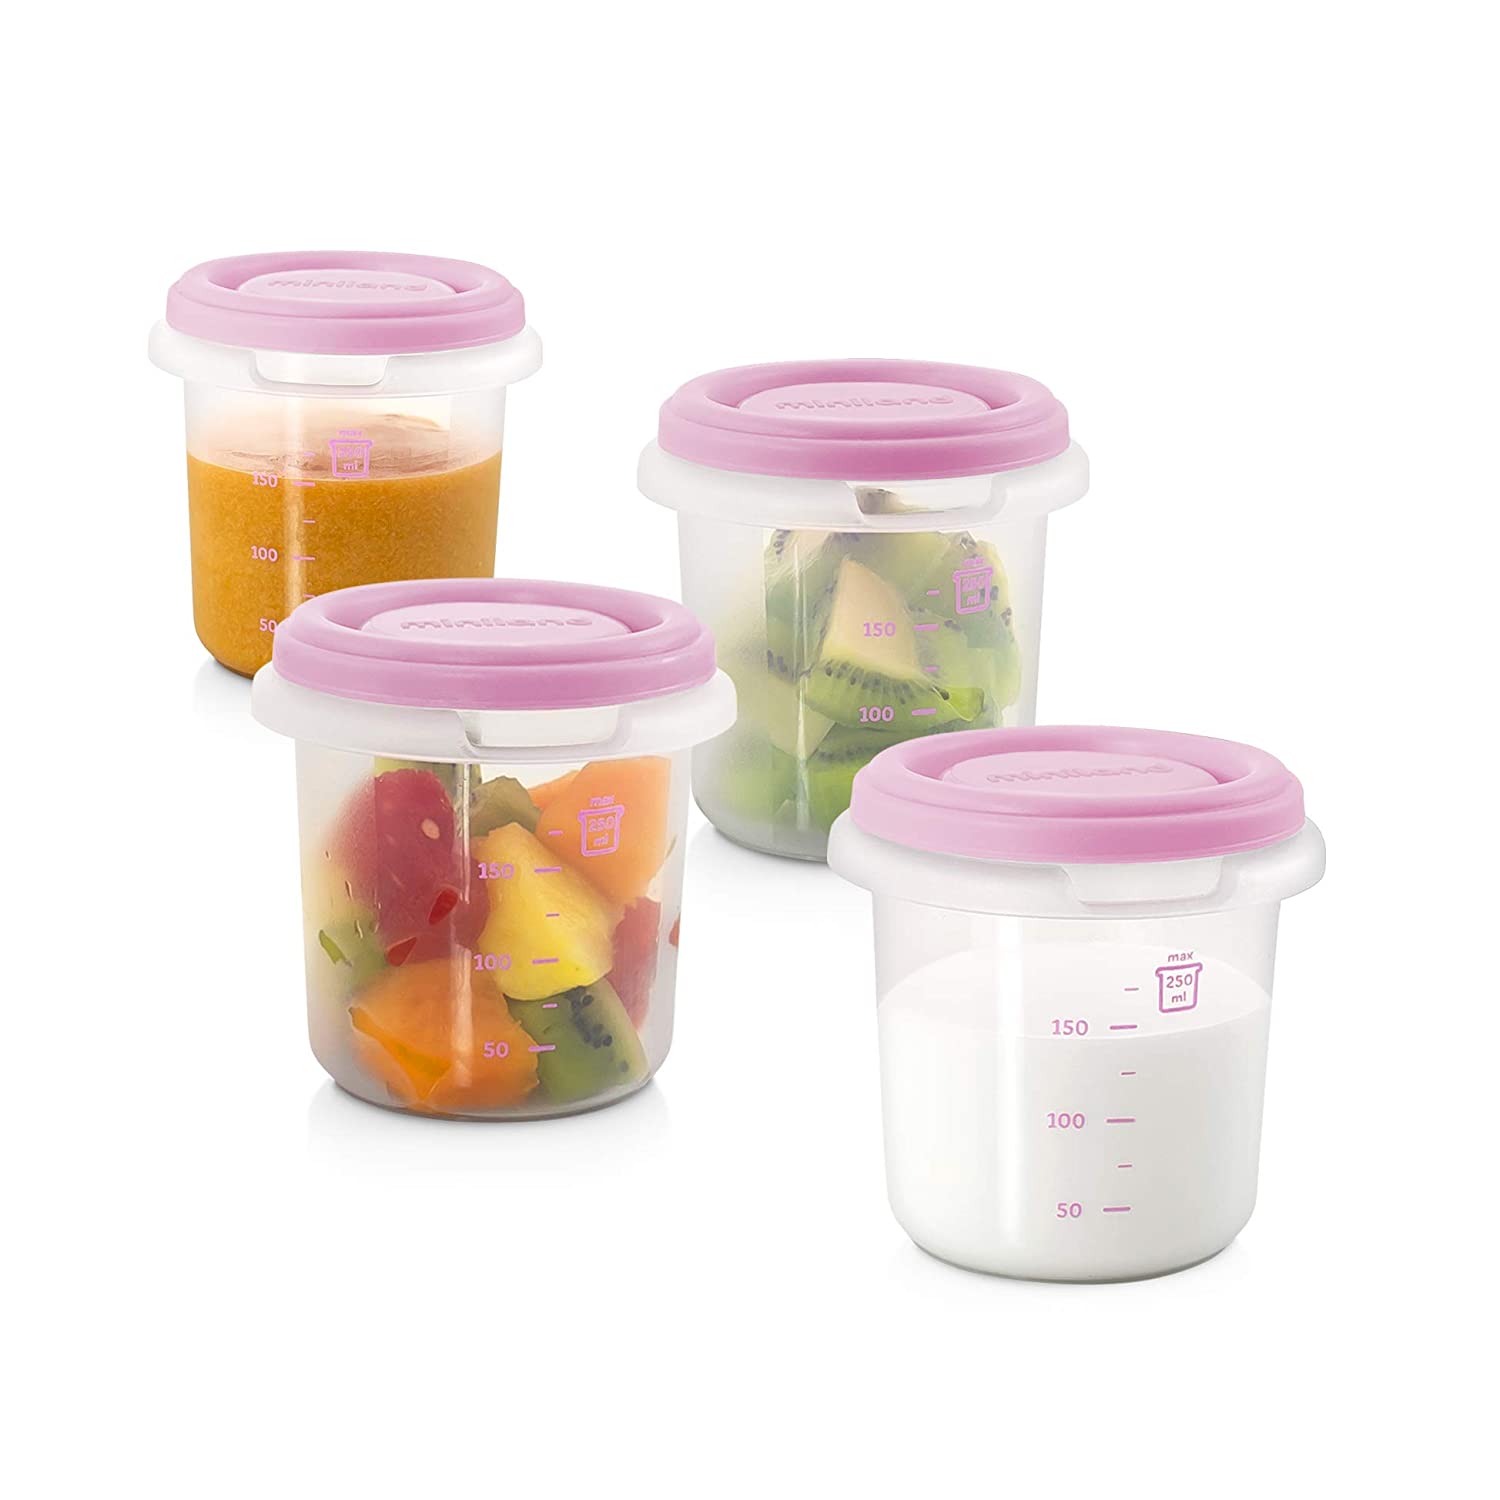 Miniland Fresh Container Set, Food Storage Containers for Baby Food, 4 x 250 ml